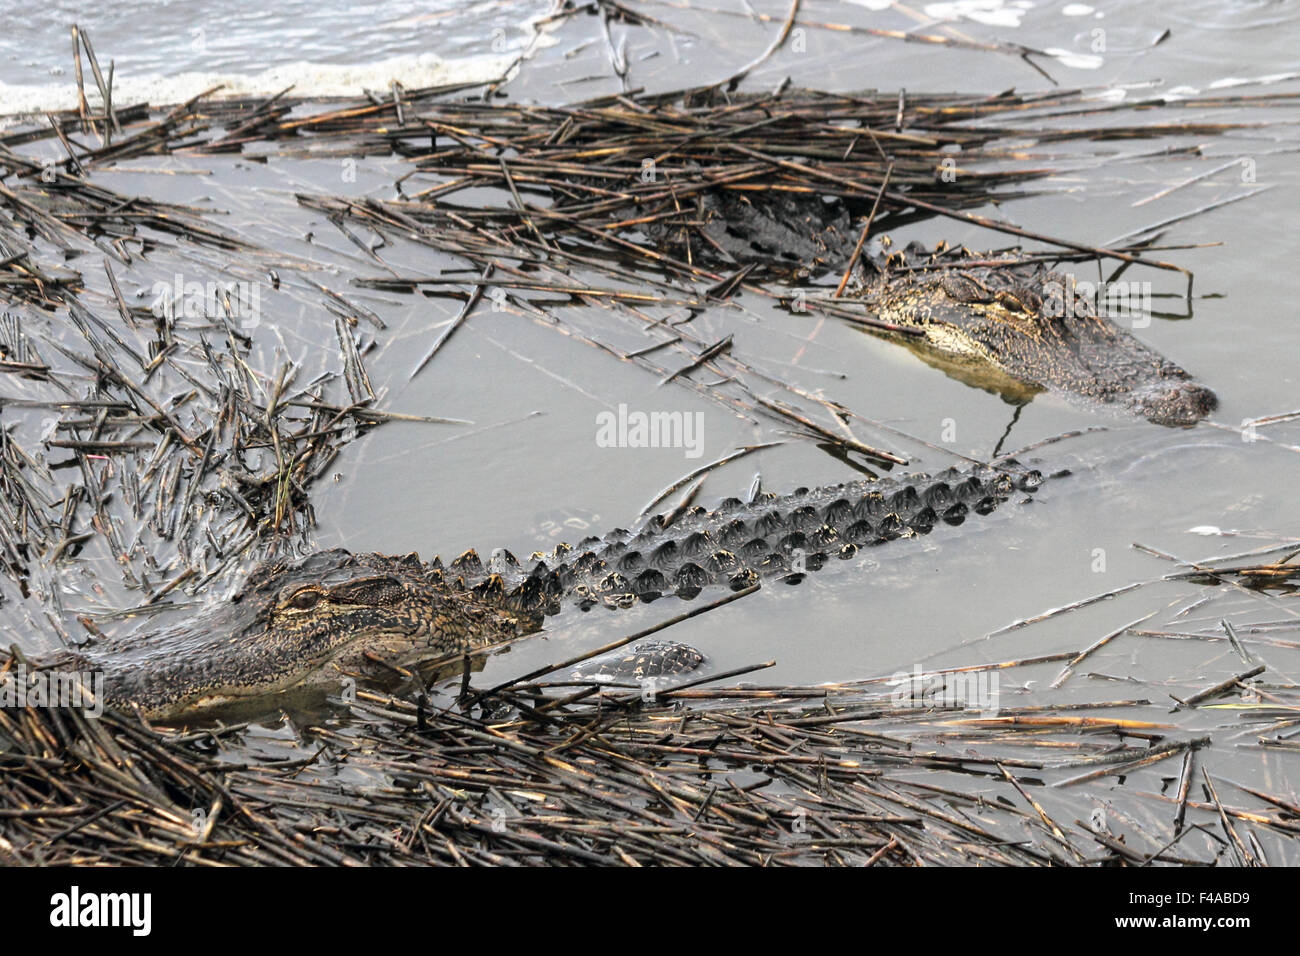 Two American alligators lurking in the reeds. Stock Photo